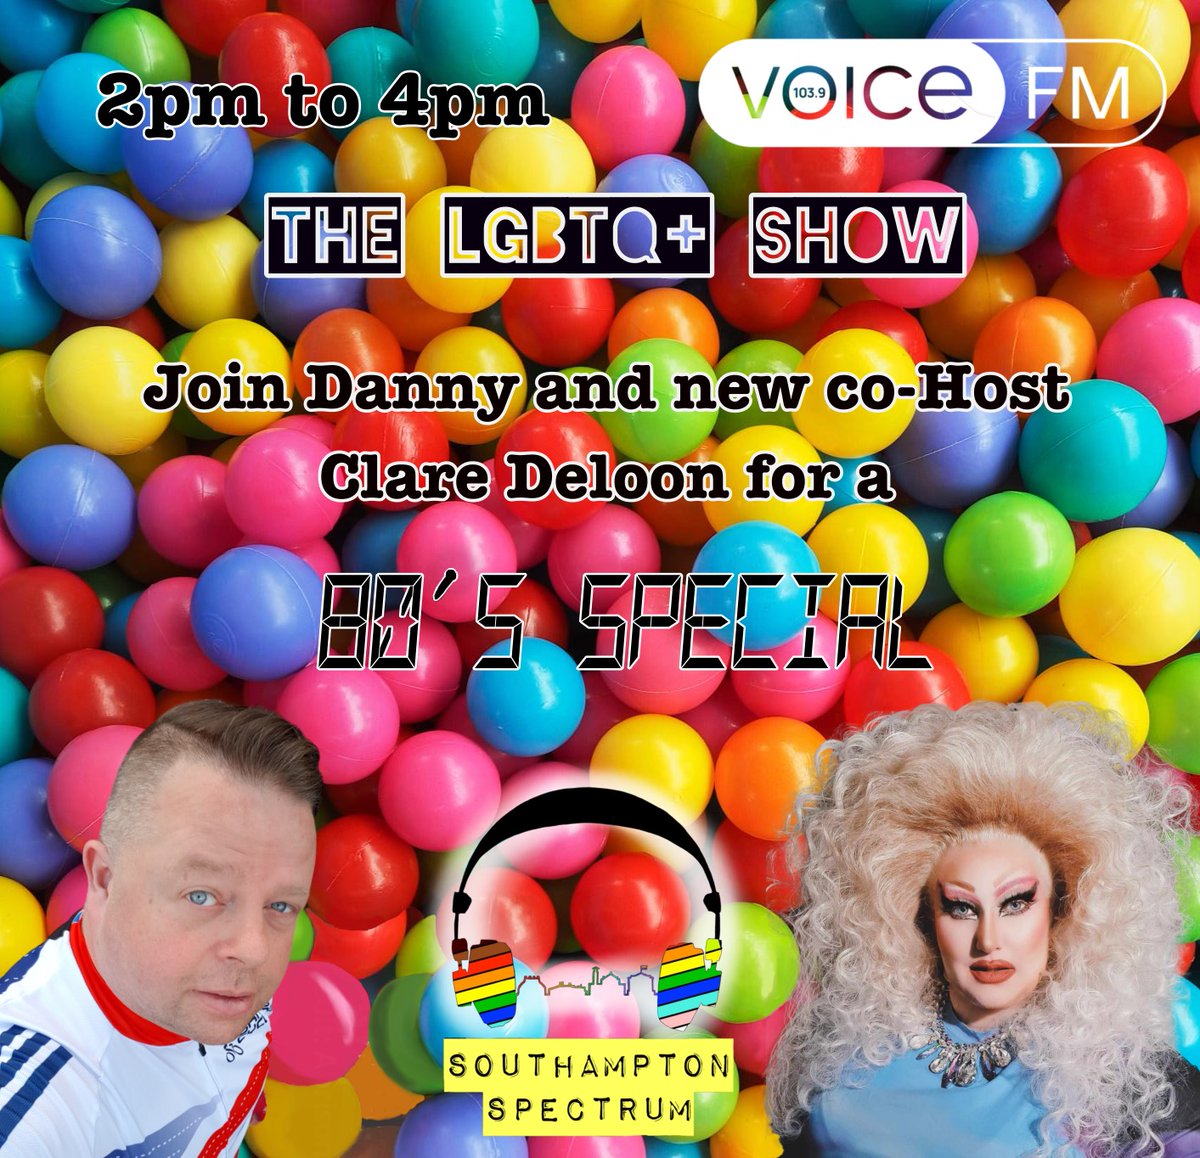 Saturday 2pm on @voicefmradio .. join for an 80s special !!

#SouthamptonSpectrum
#SotonSpectrum #VoiceFm  #LgbtRadio #LGBT #LGBTQSouthampton #LGBTQ #GayRadio #TransRightsMatter  #NoLGBWithoutTheT #LGBTQIA #Bisexuality #PanSexual #Lesbian #Transgender #NonBinary #GenderFluid